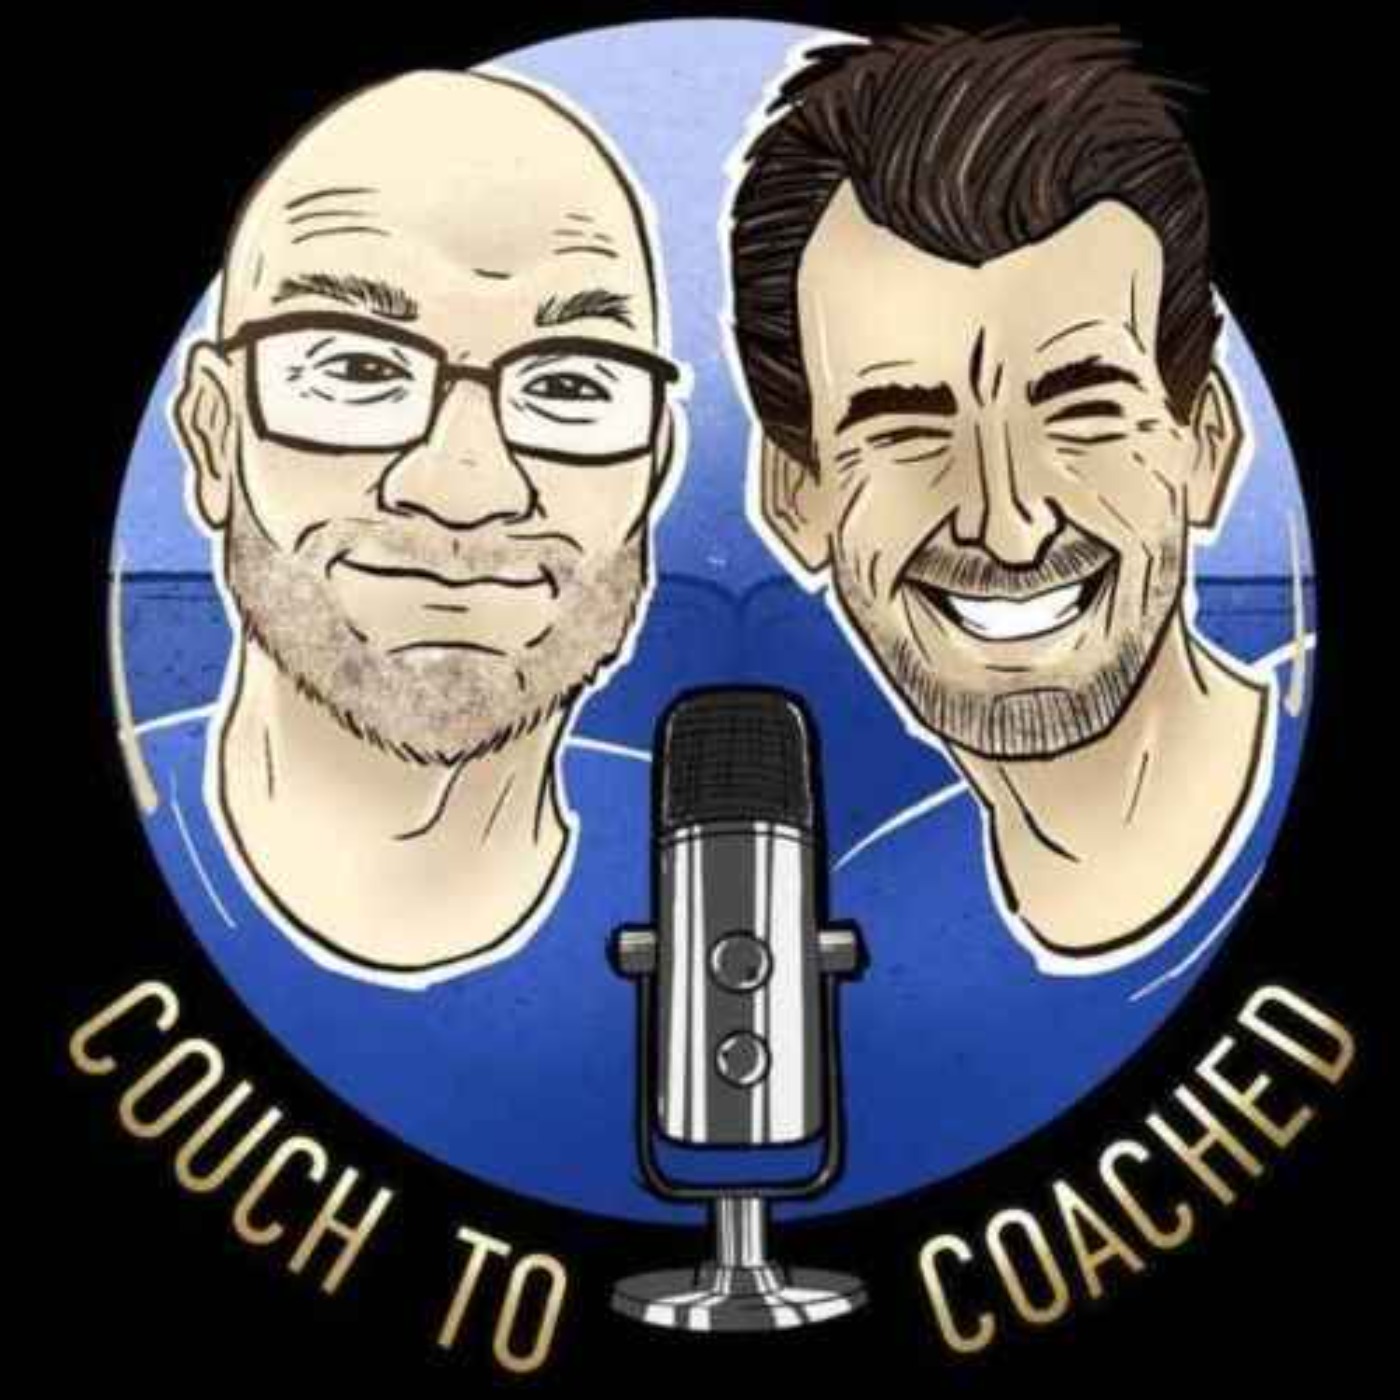 Couch to coached- Running Podcast Episode 80